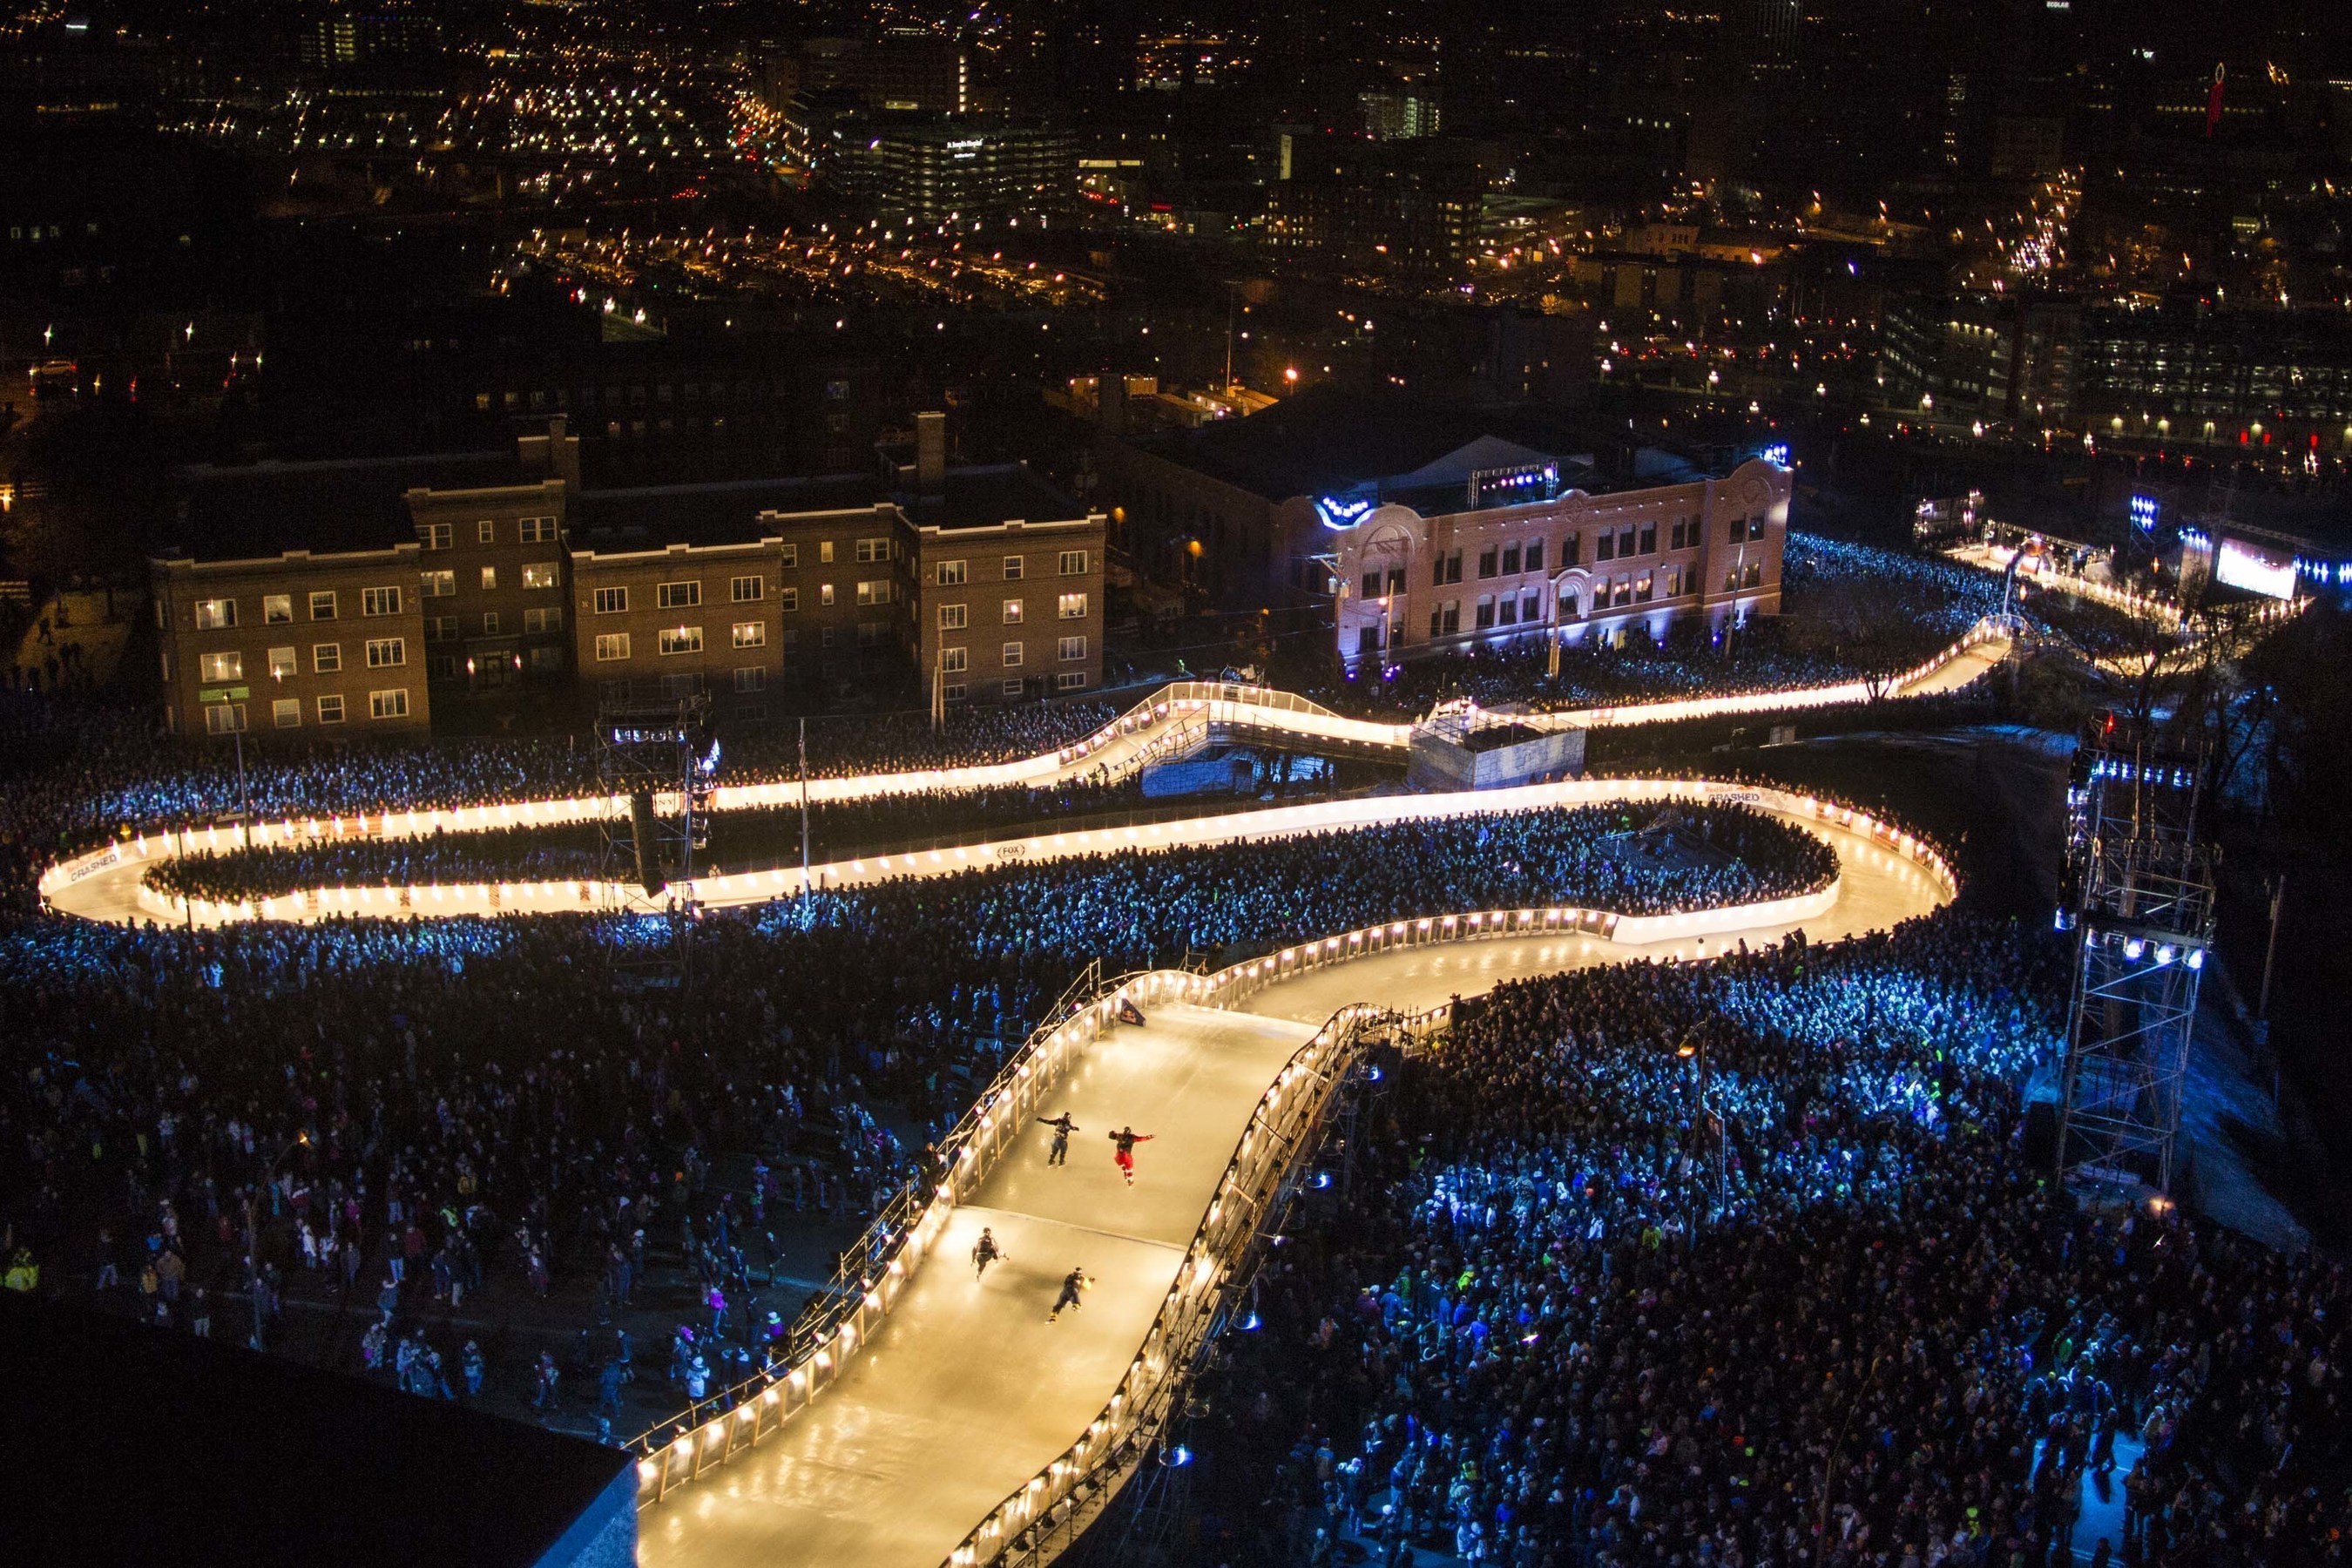 More than 140,000 spectators came out to Red Bull Crashed Ice Saint Paul 2015